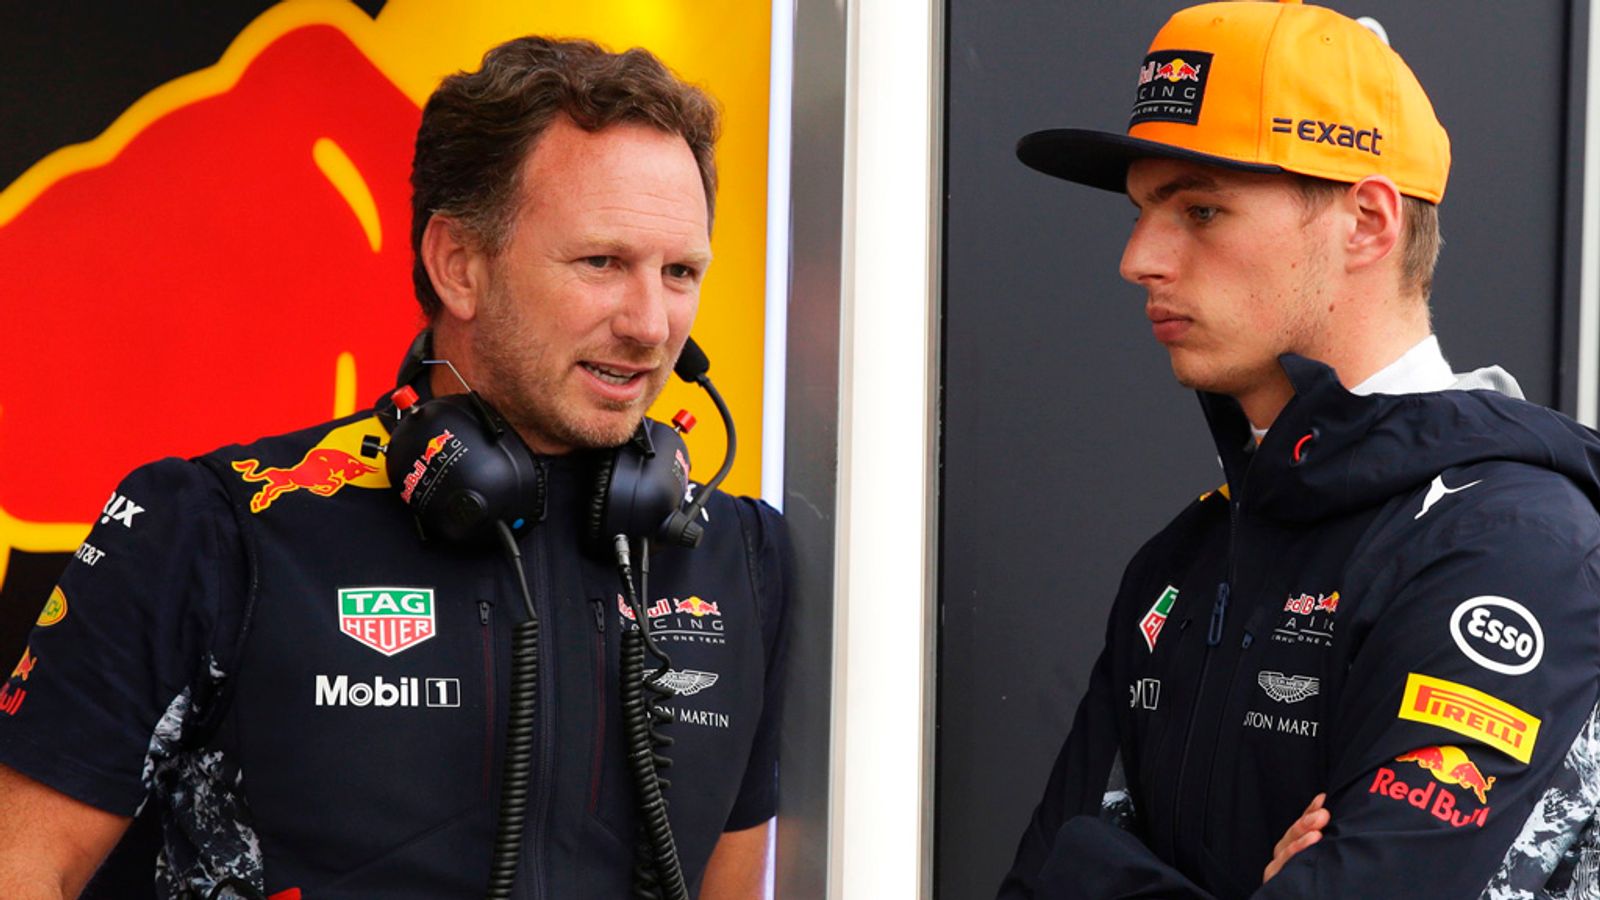 Christian Horner 'This engine has done nothing positive for Formula 1